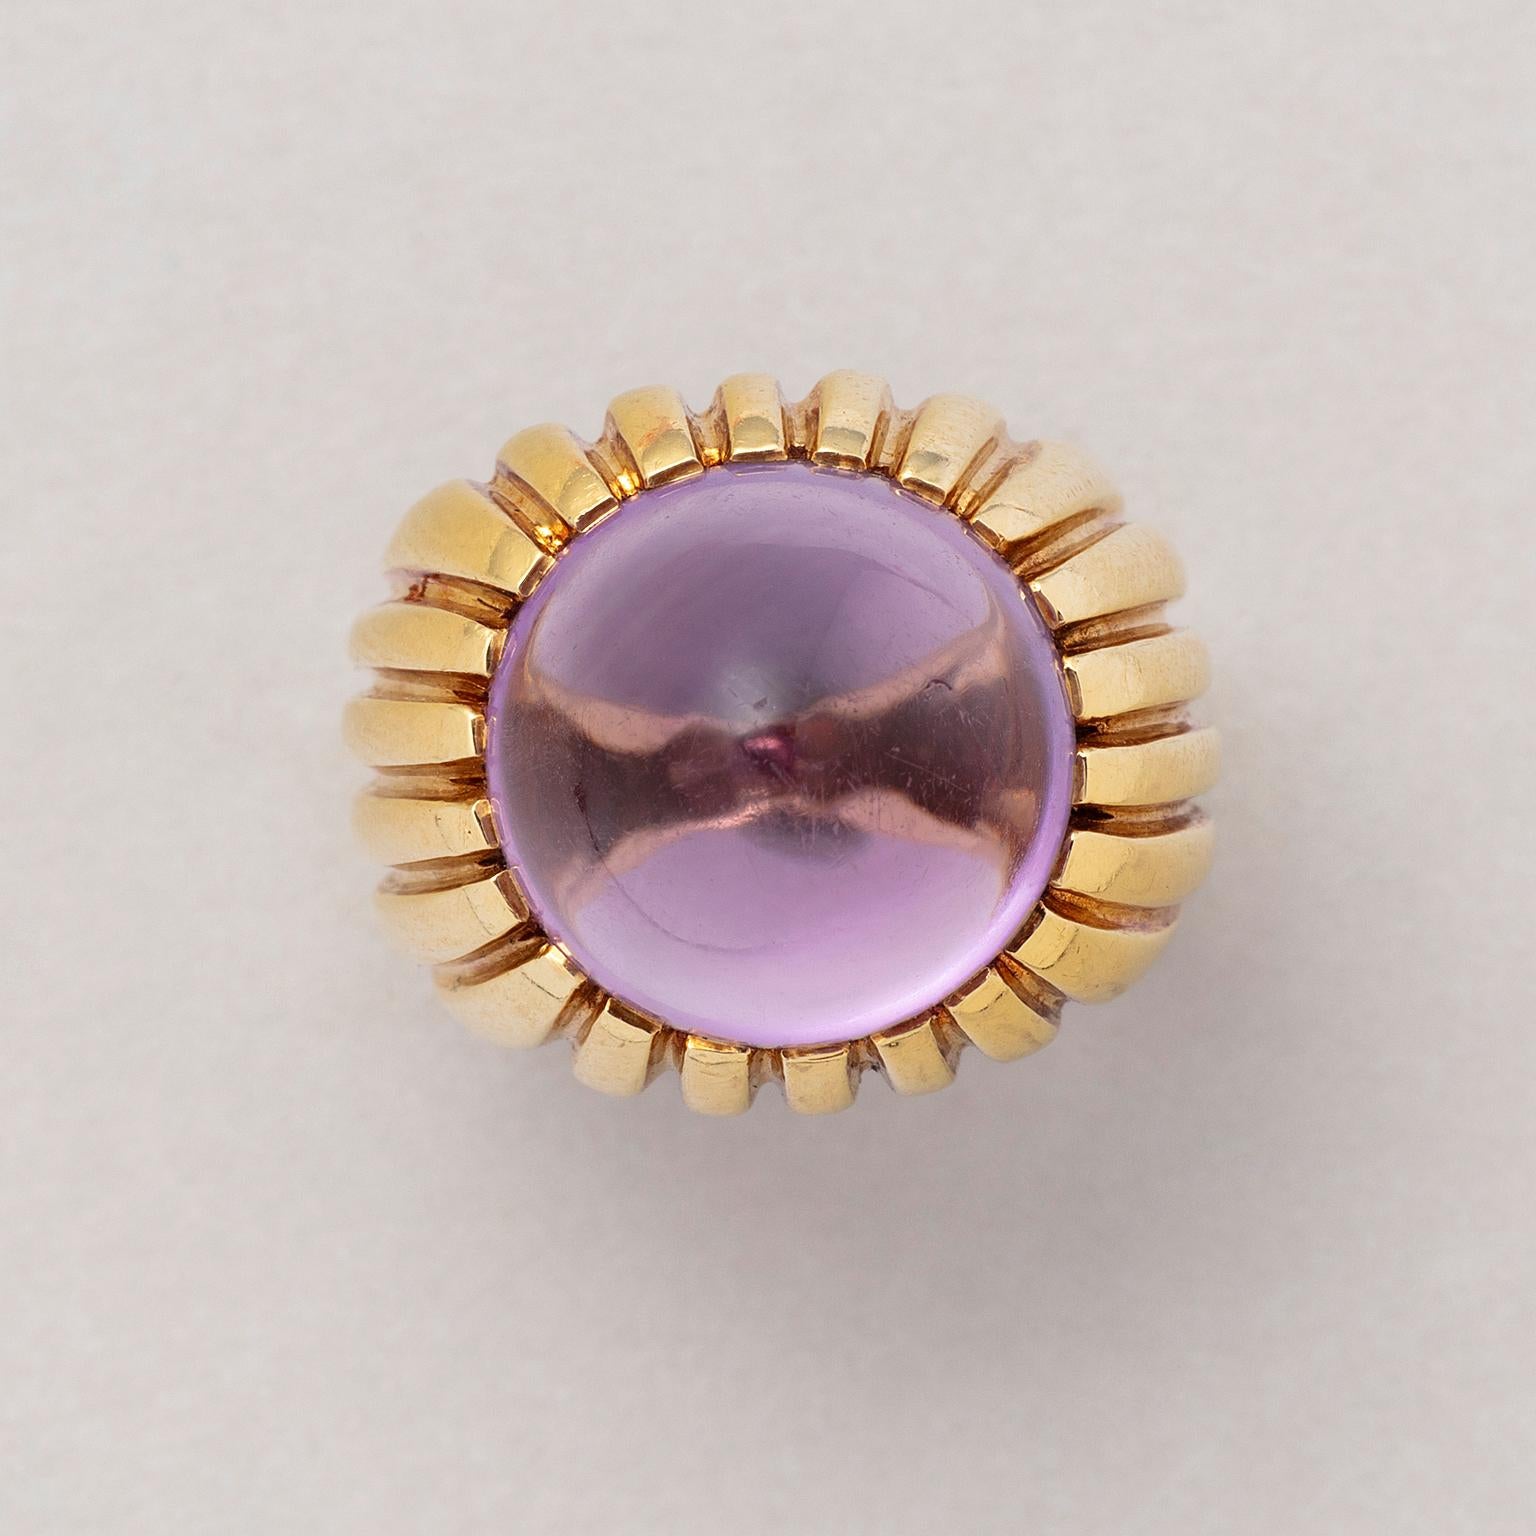 An 18 carat yellow gold verticvally ribbed ring set with a round, pointed cabochon cut amethyst. Signed: Fred, Paris, circa 1980.

weight: 14.45 grams
size: 16.25 mm / 5 1/2 US
width: 5.5 – 12 mm